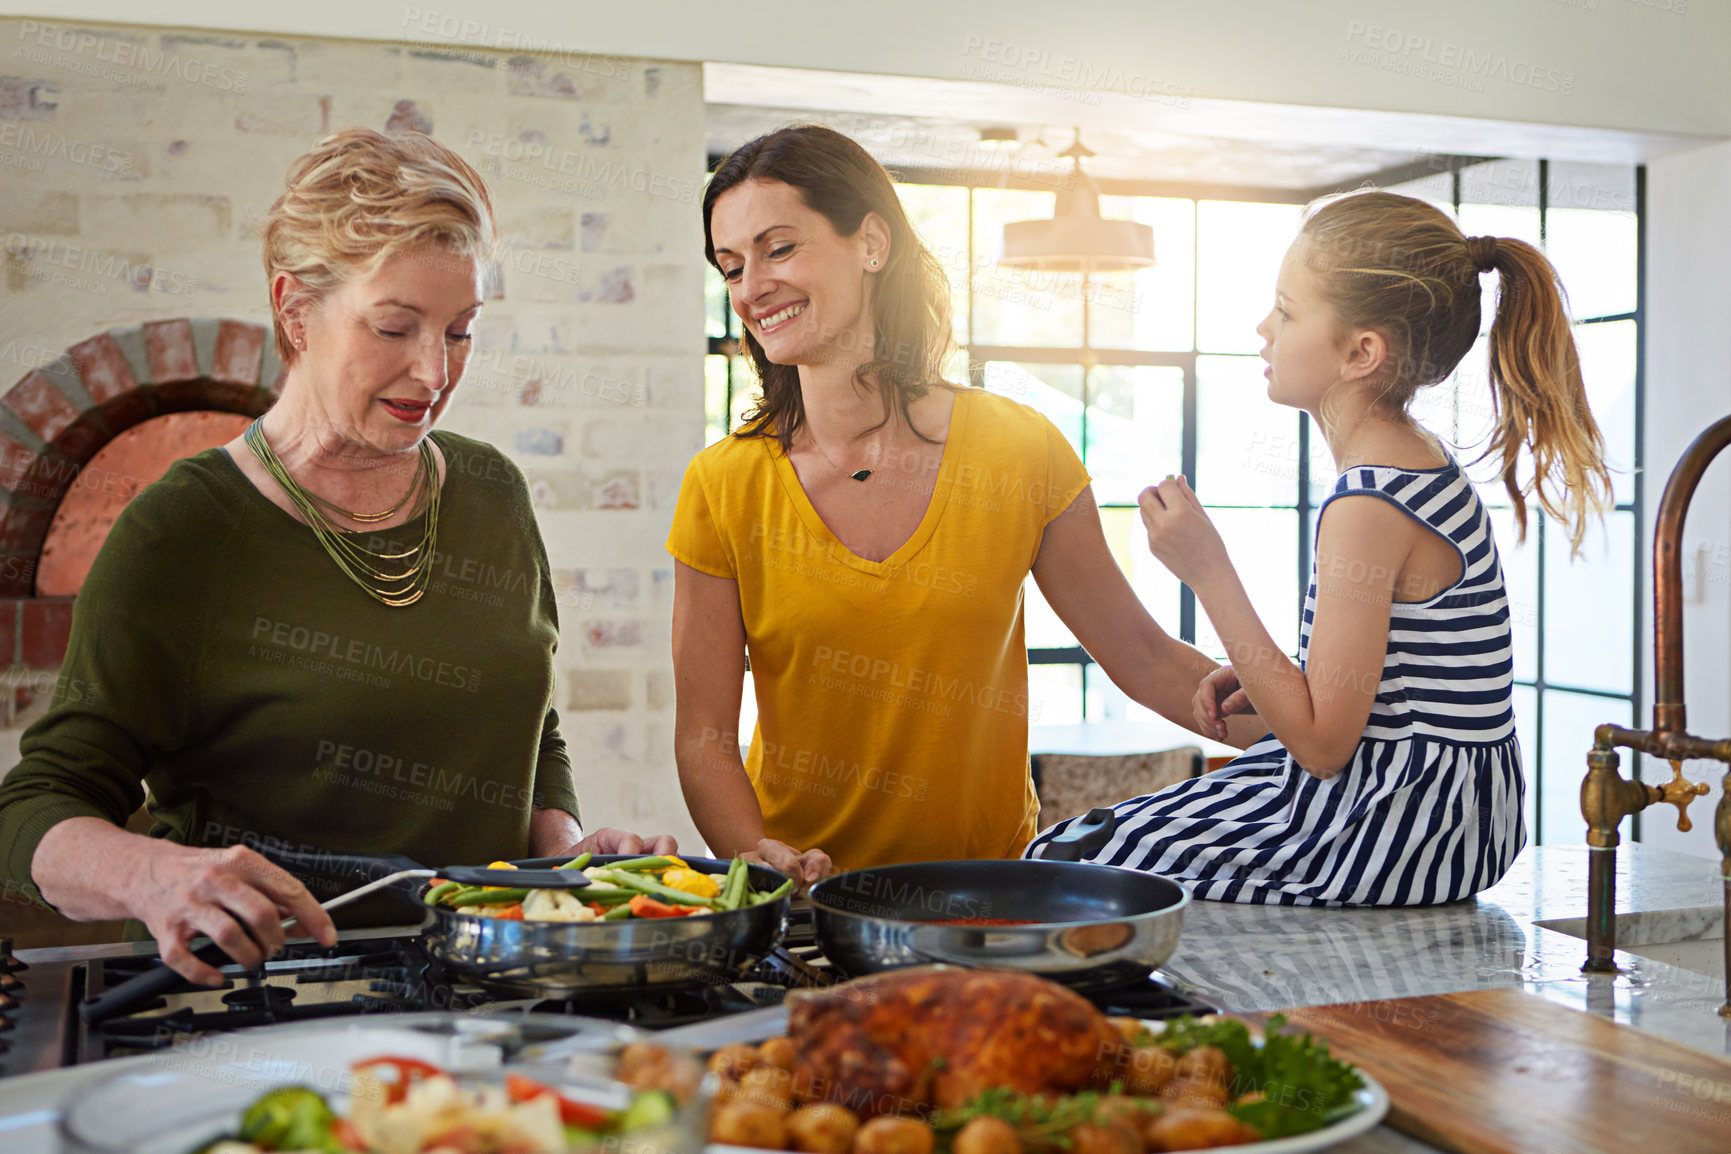 Buy stock photo Shot of a three generational family of women cooking in the kitchen